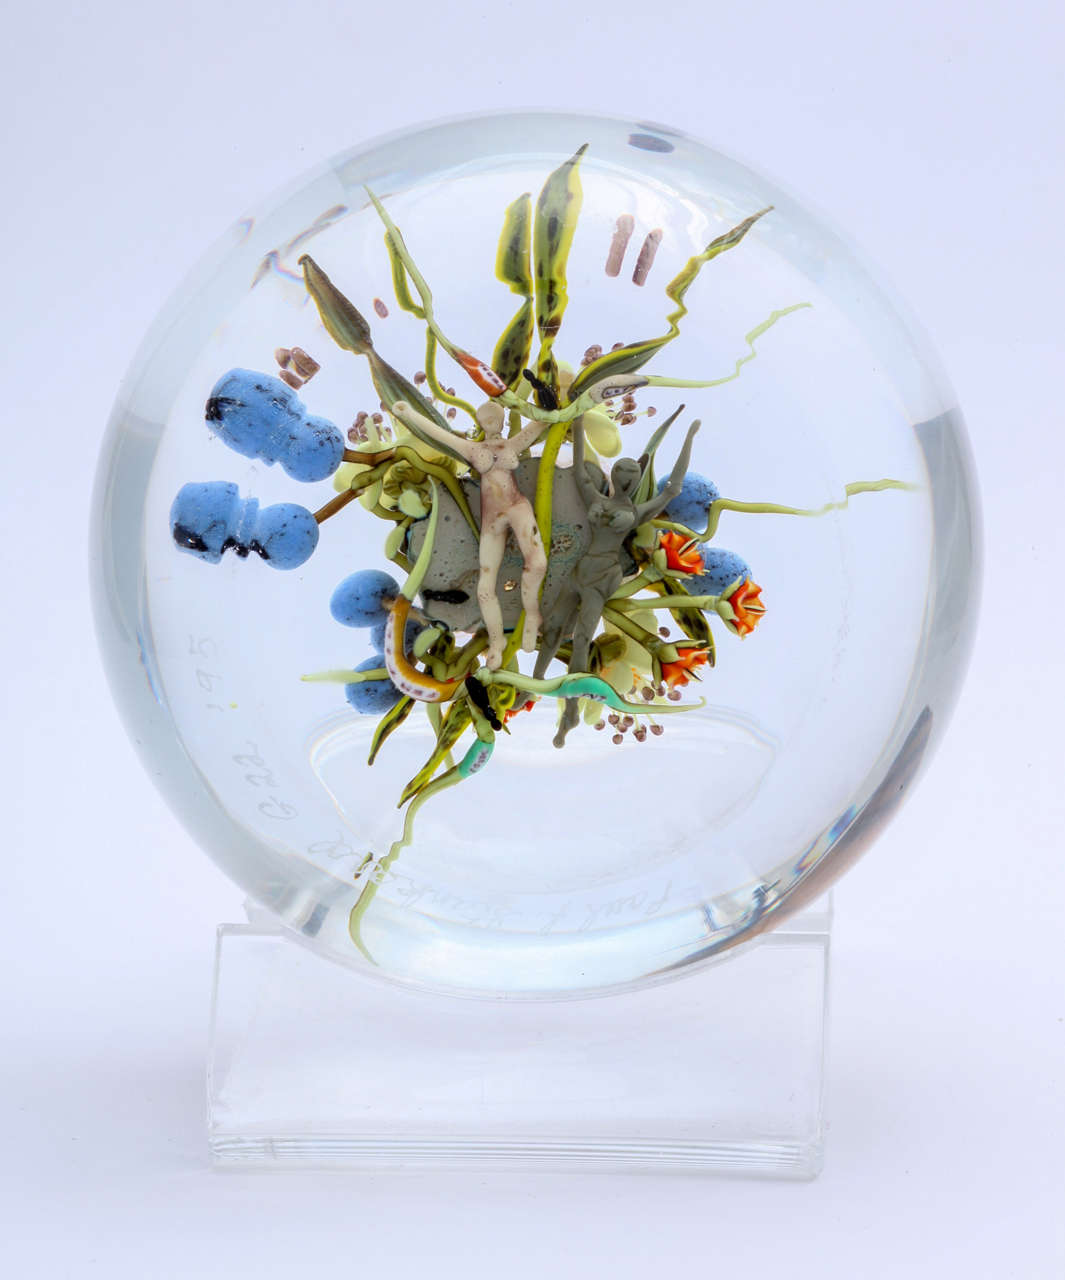 A beautiful Paul Stankard bouquet paperweight with a central honeycomb, yellow chicory, blueberries, honey bee and two spirits